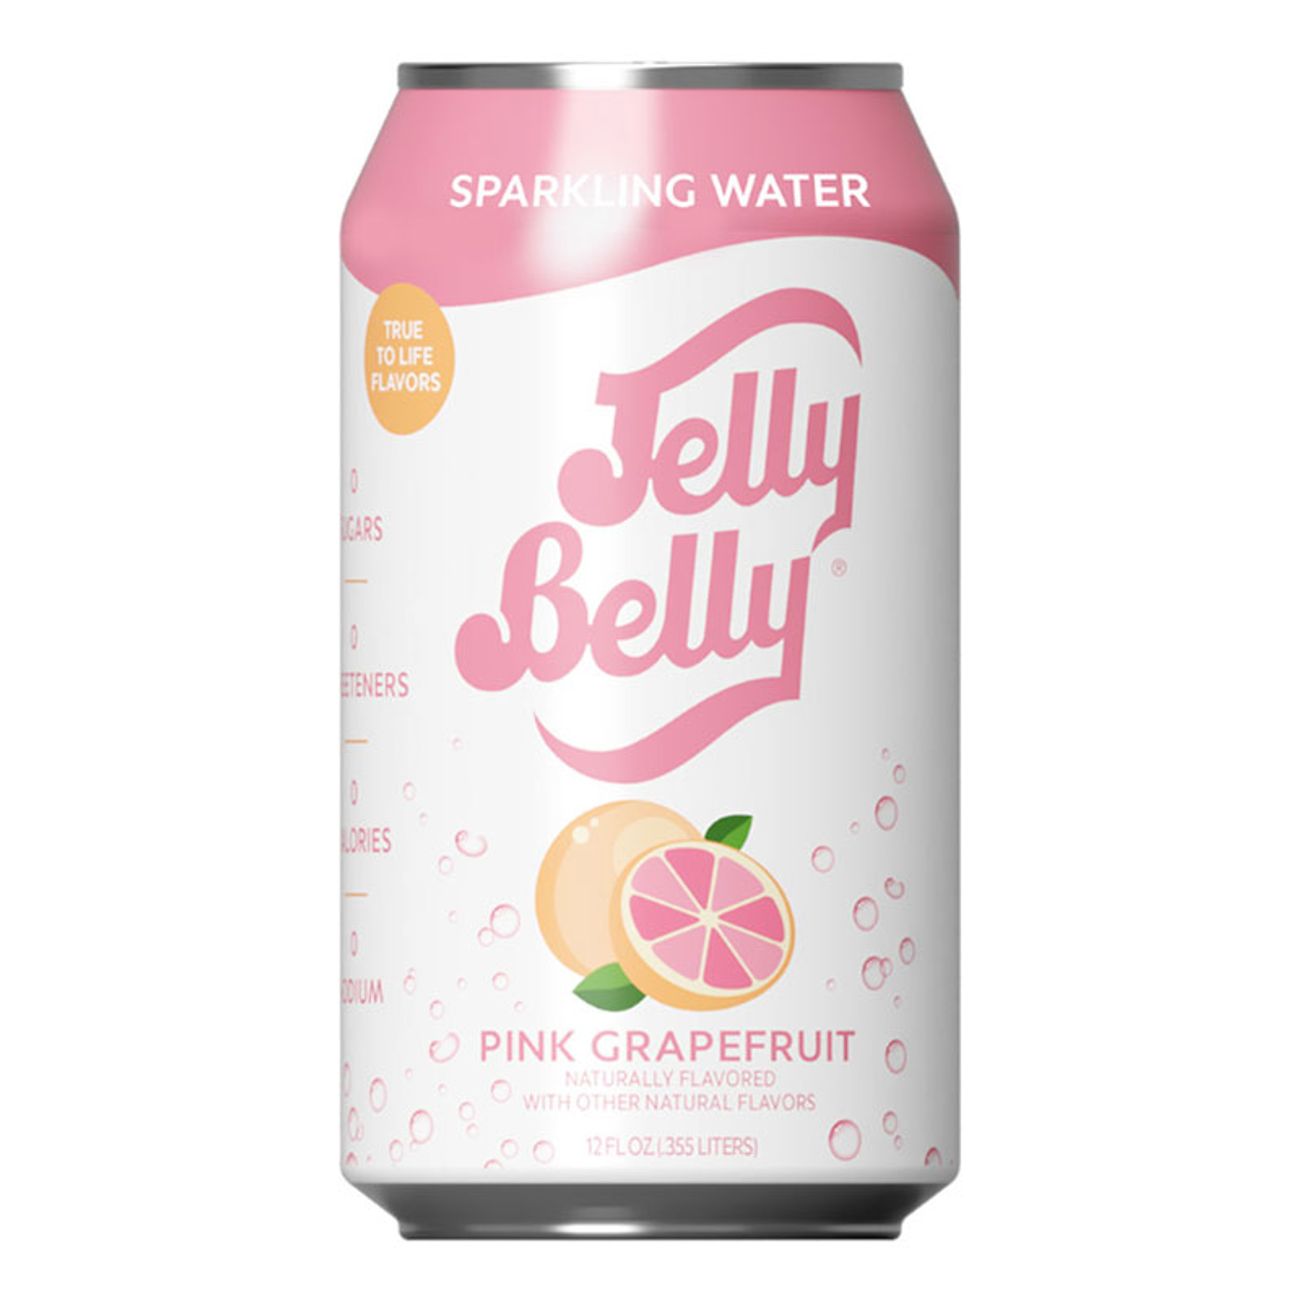 jelly-belly-pink-grapefruit-sparkling-water-76488-1